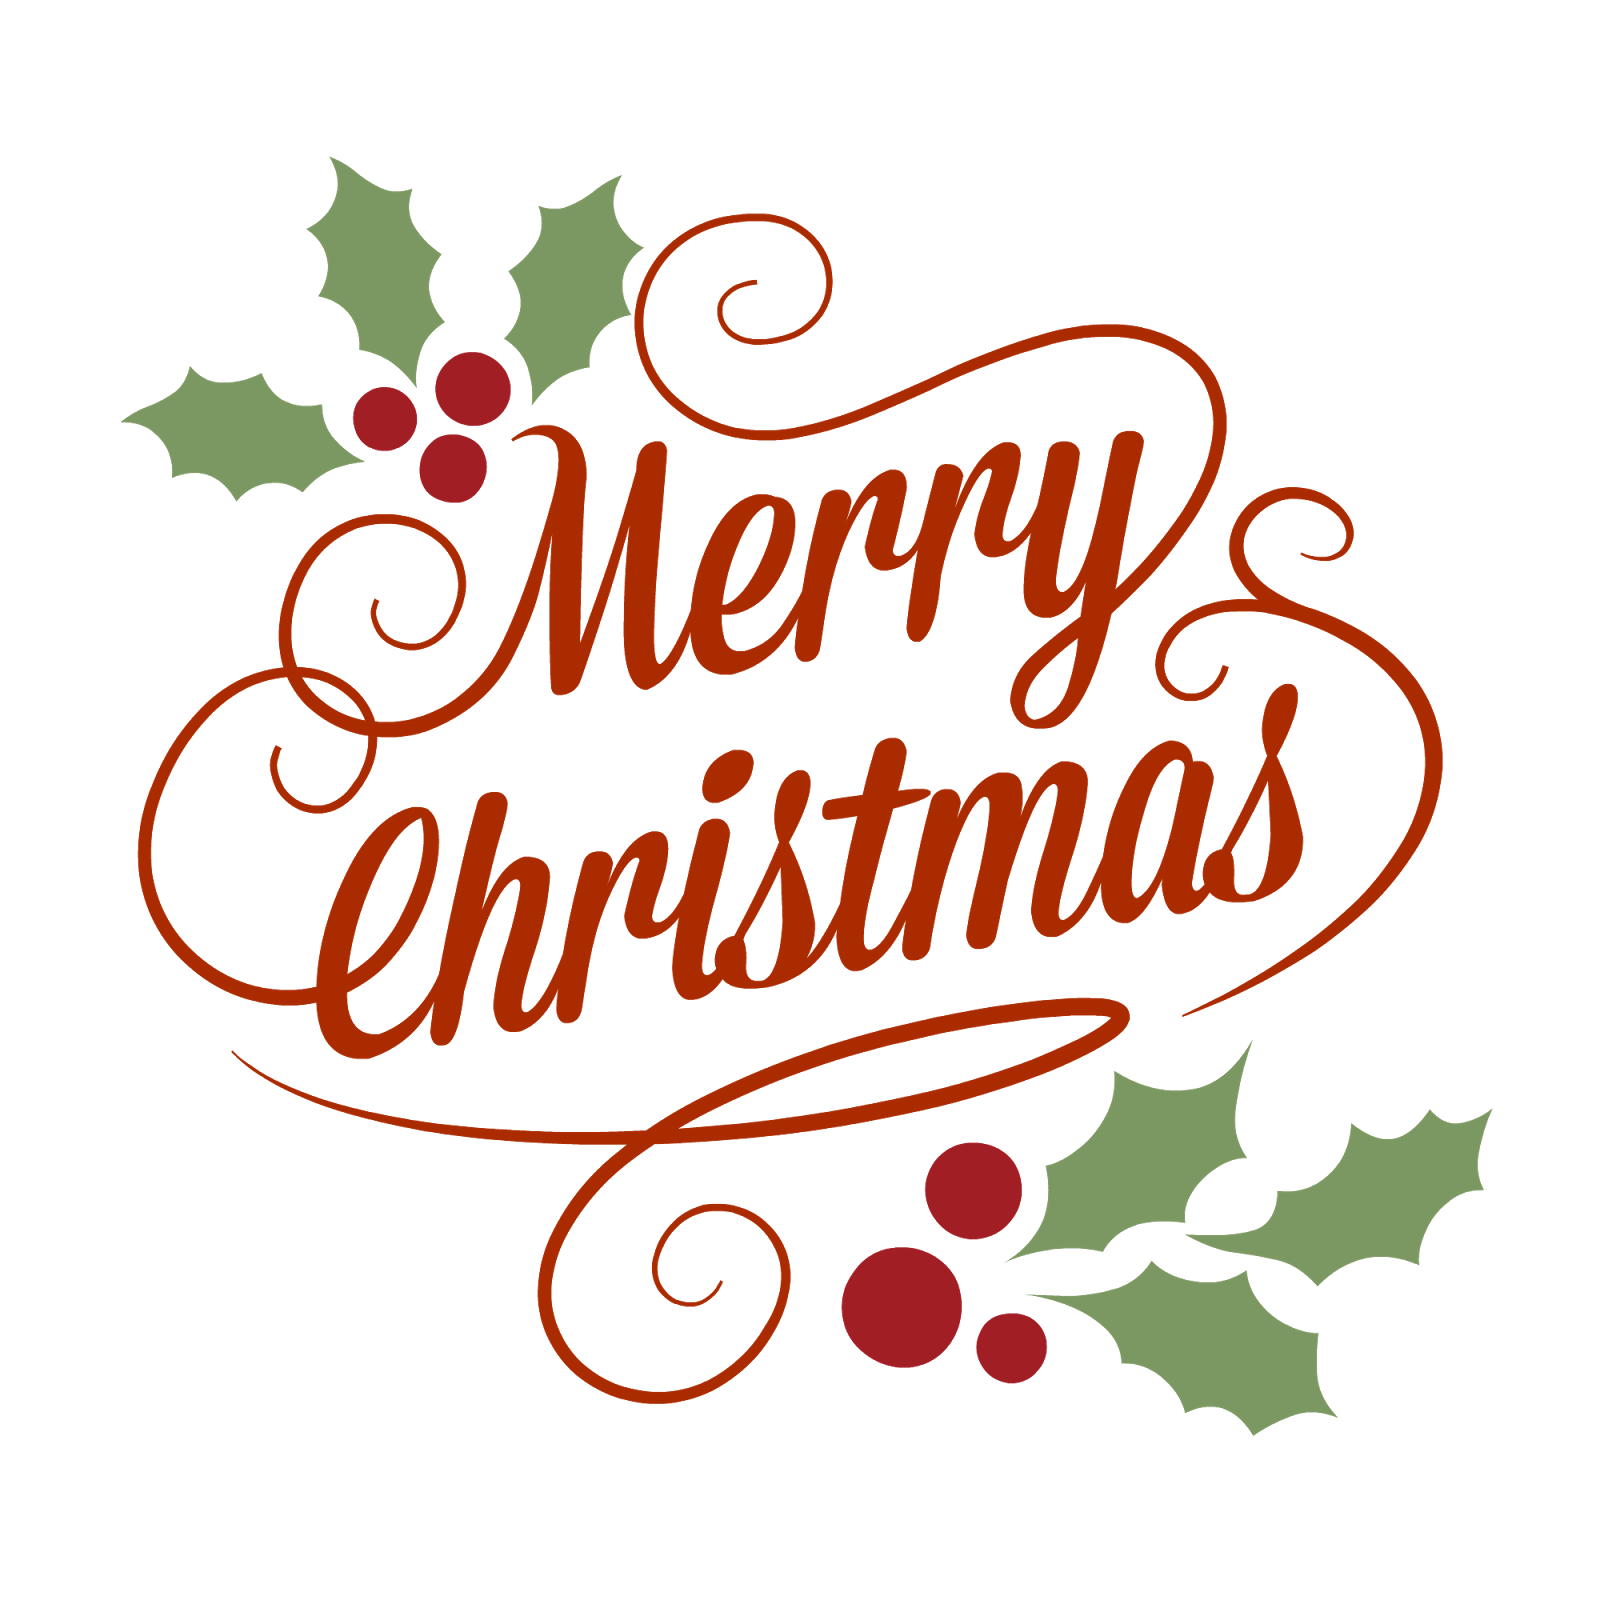 Merry christmas 2017 from Nanosoft, with love!